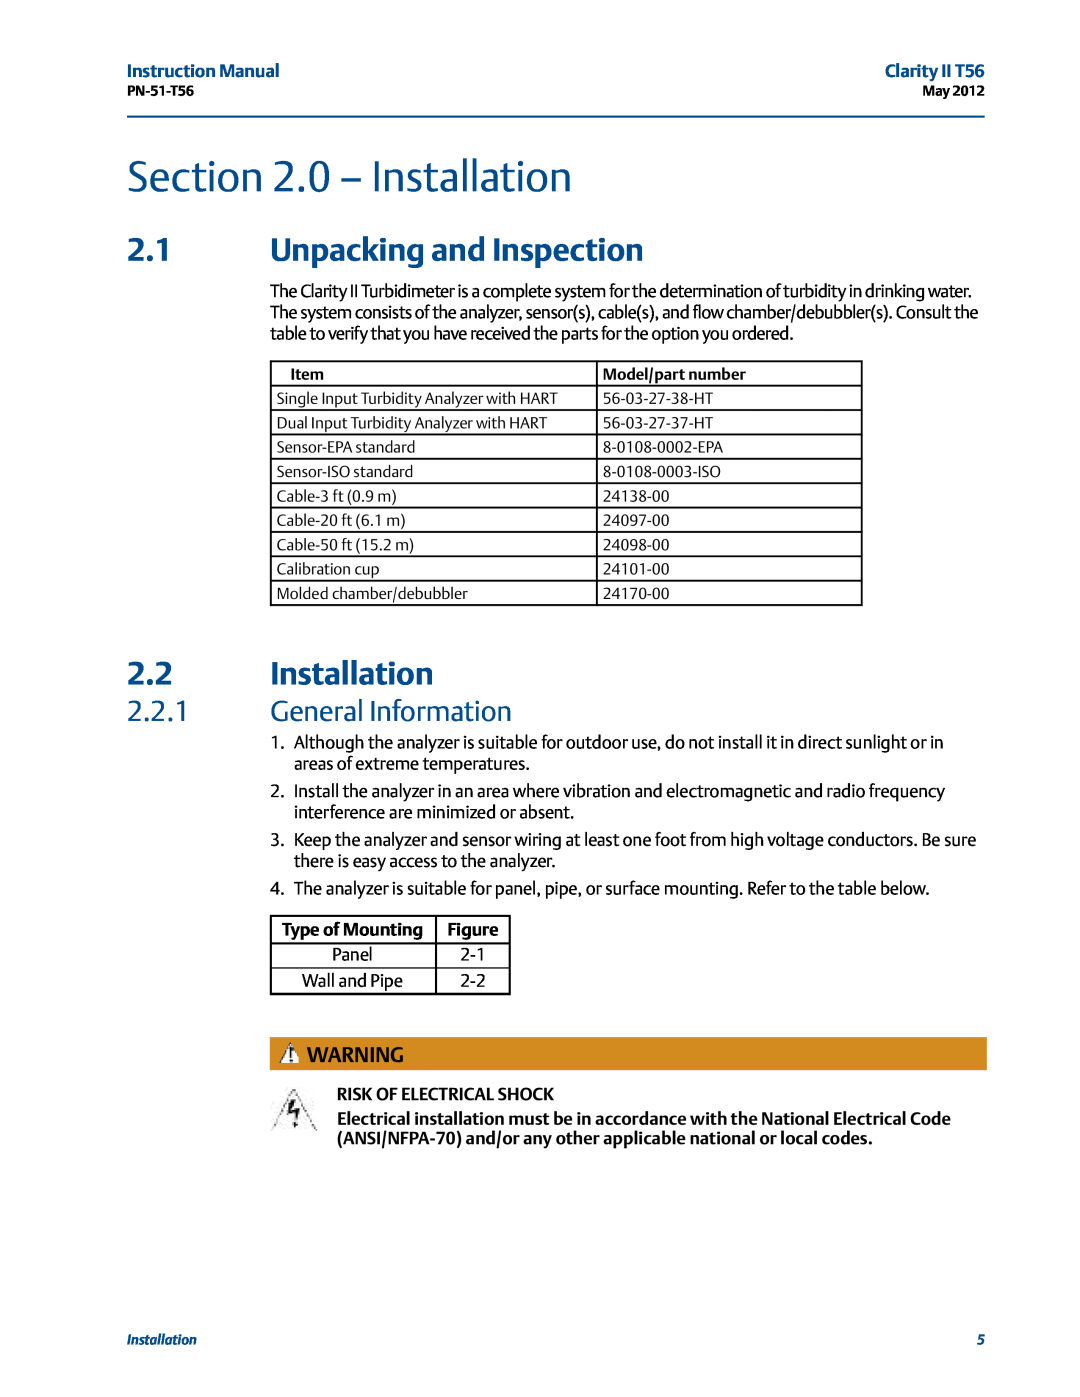 Emerson PN-51-T56 instruction manual 0 - Installation, Unpacking and Inspection, General Information, Type of Mounting 